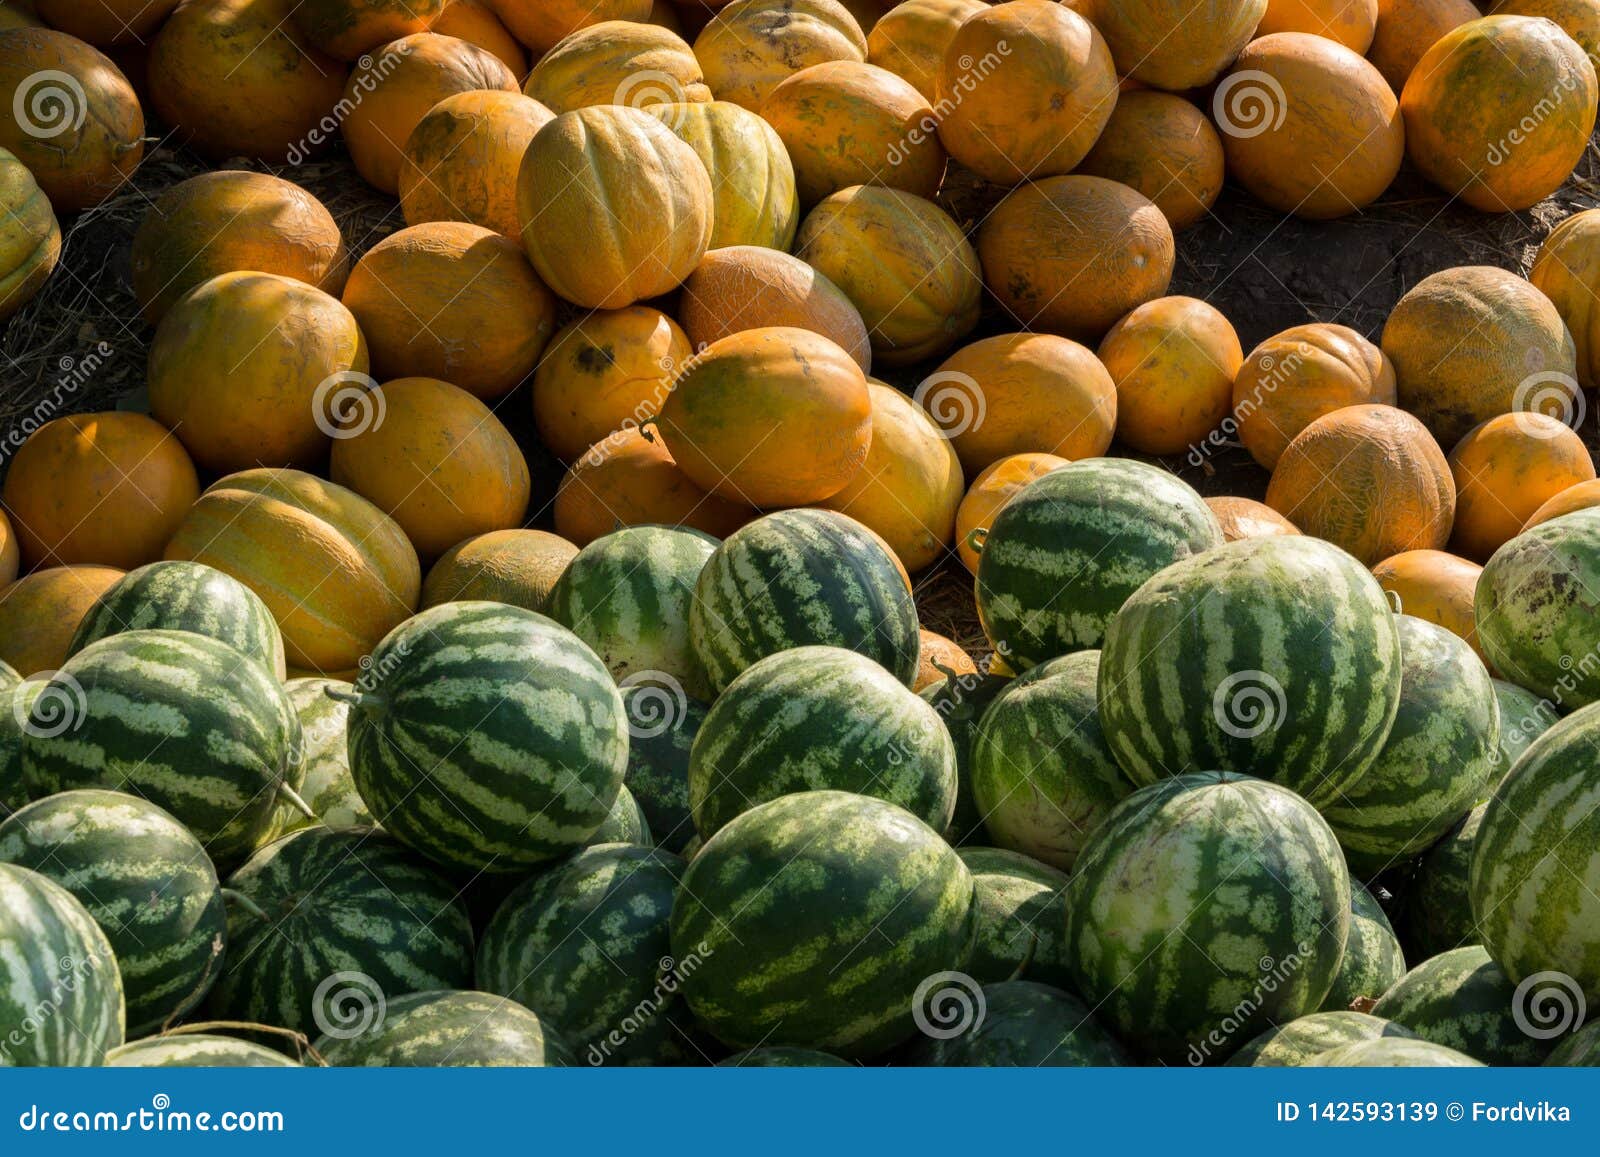 sale of watermelon and melon.